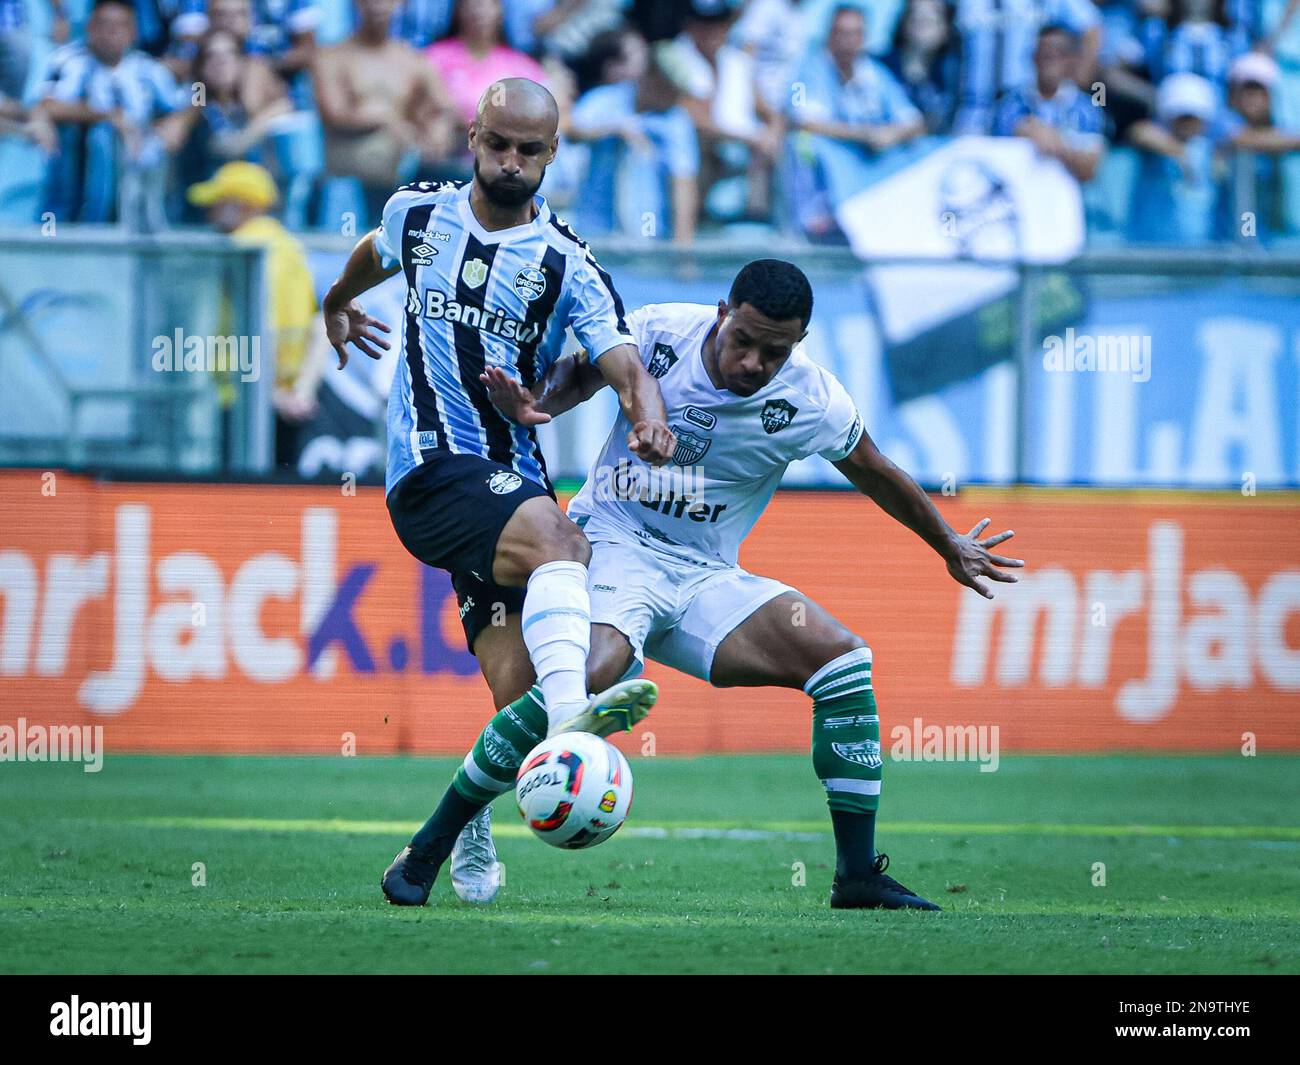 Gremio vs CRB: A Clash of Giants